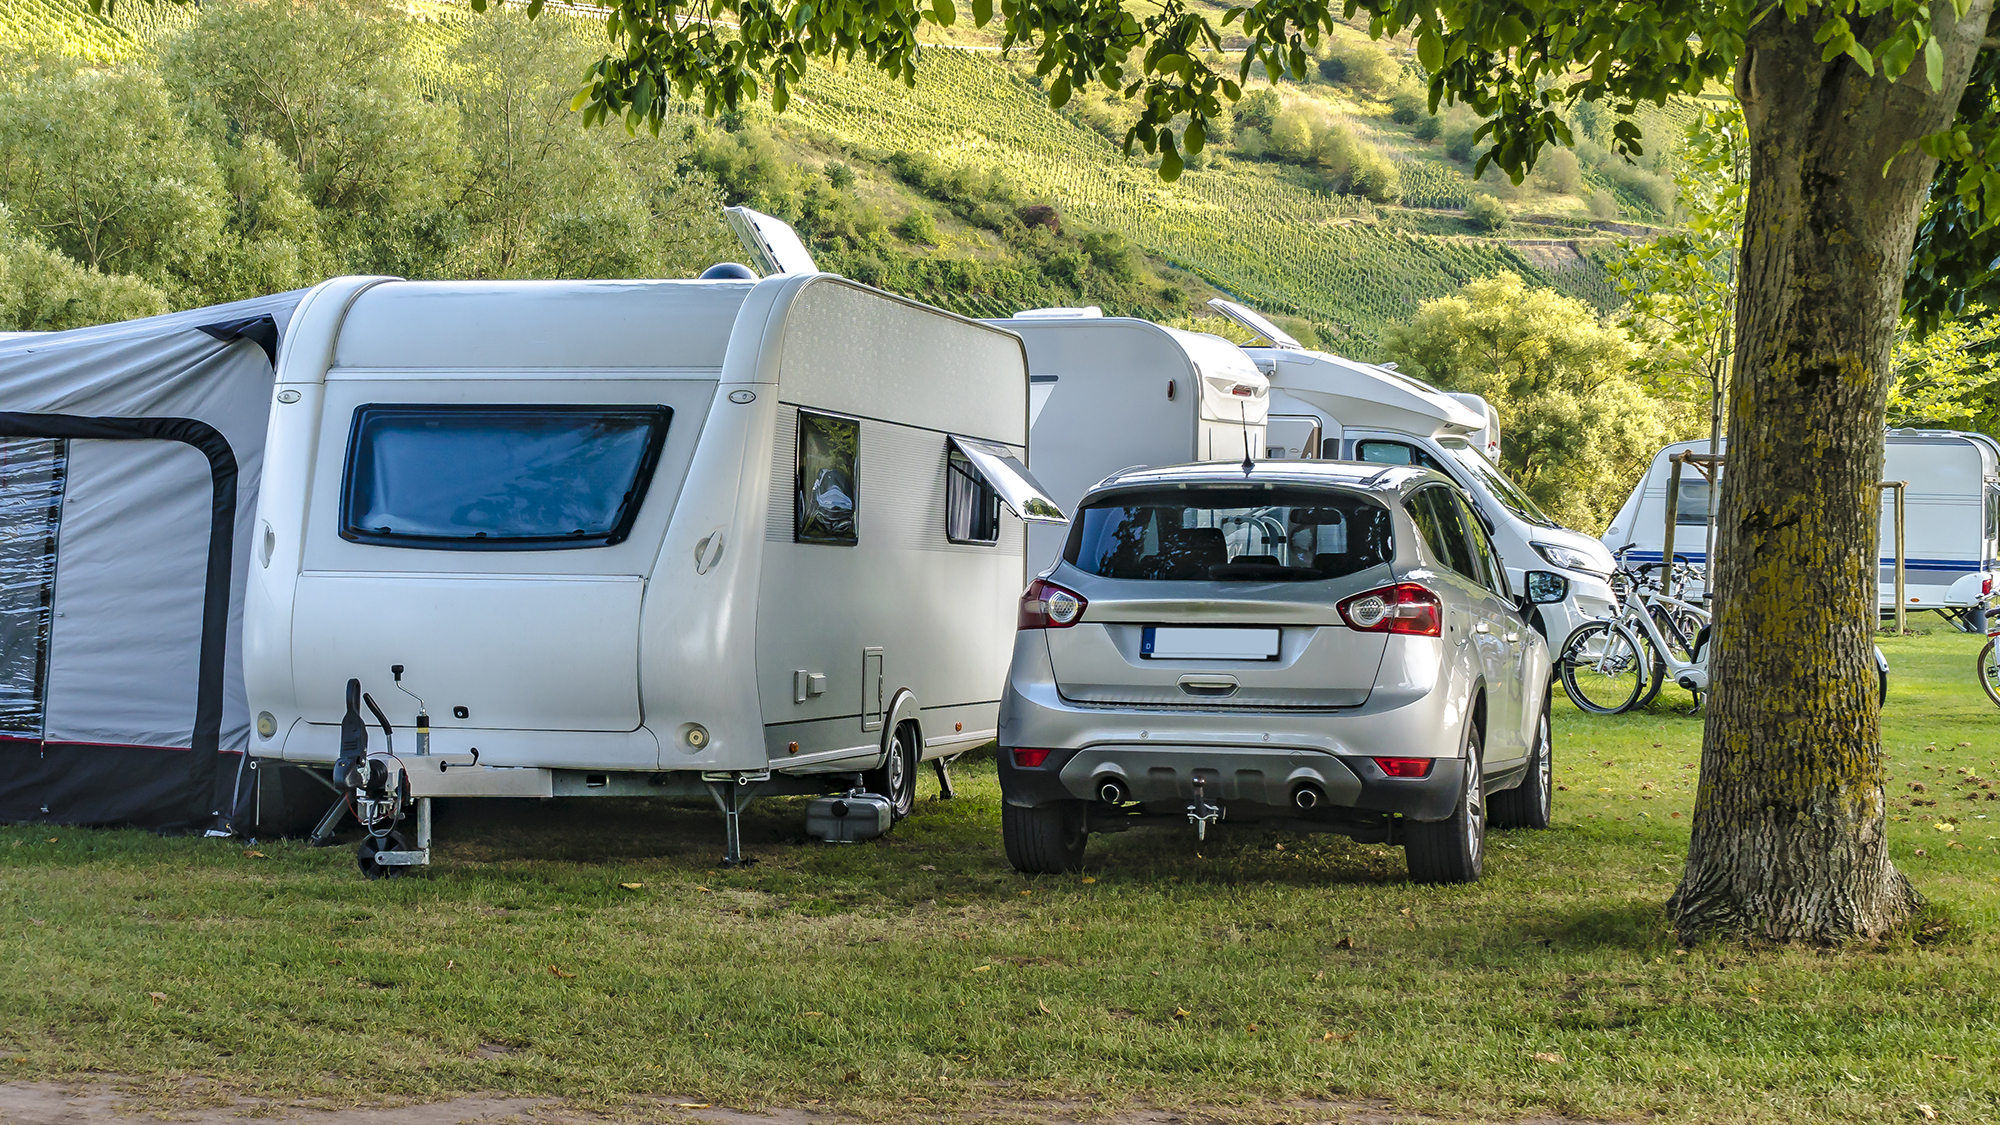 Caravan with awning attached next to a car in the French countryside